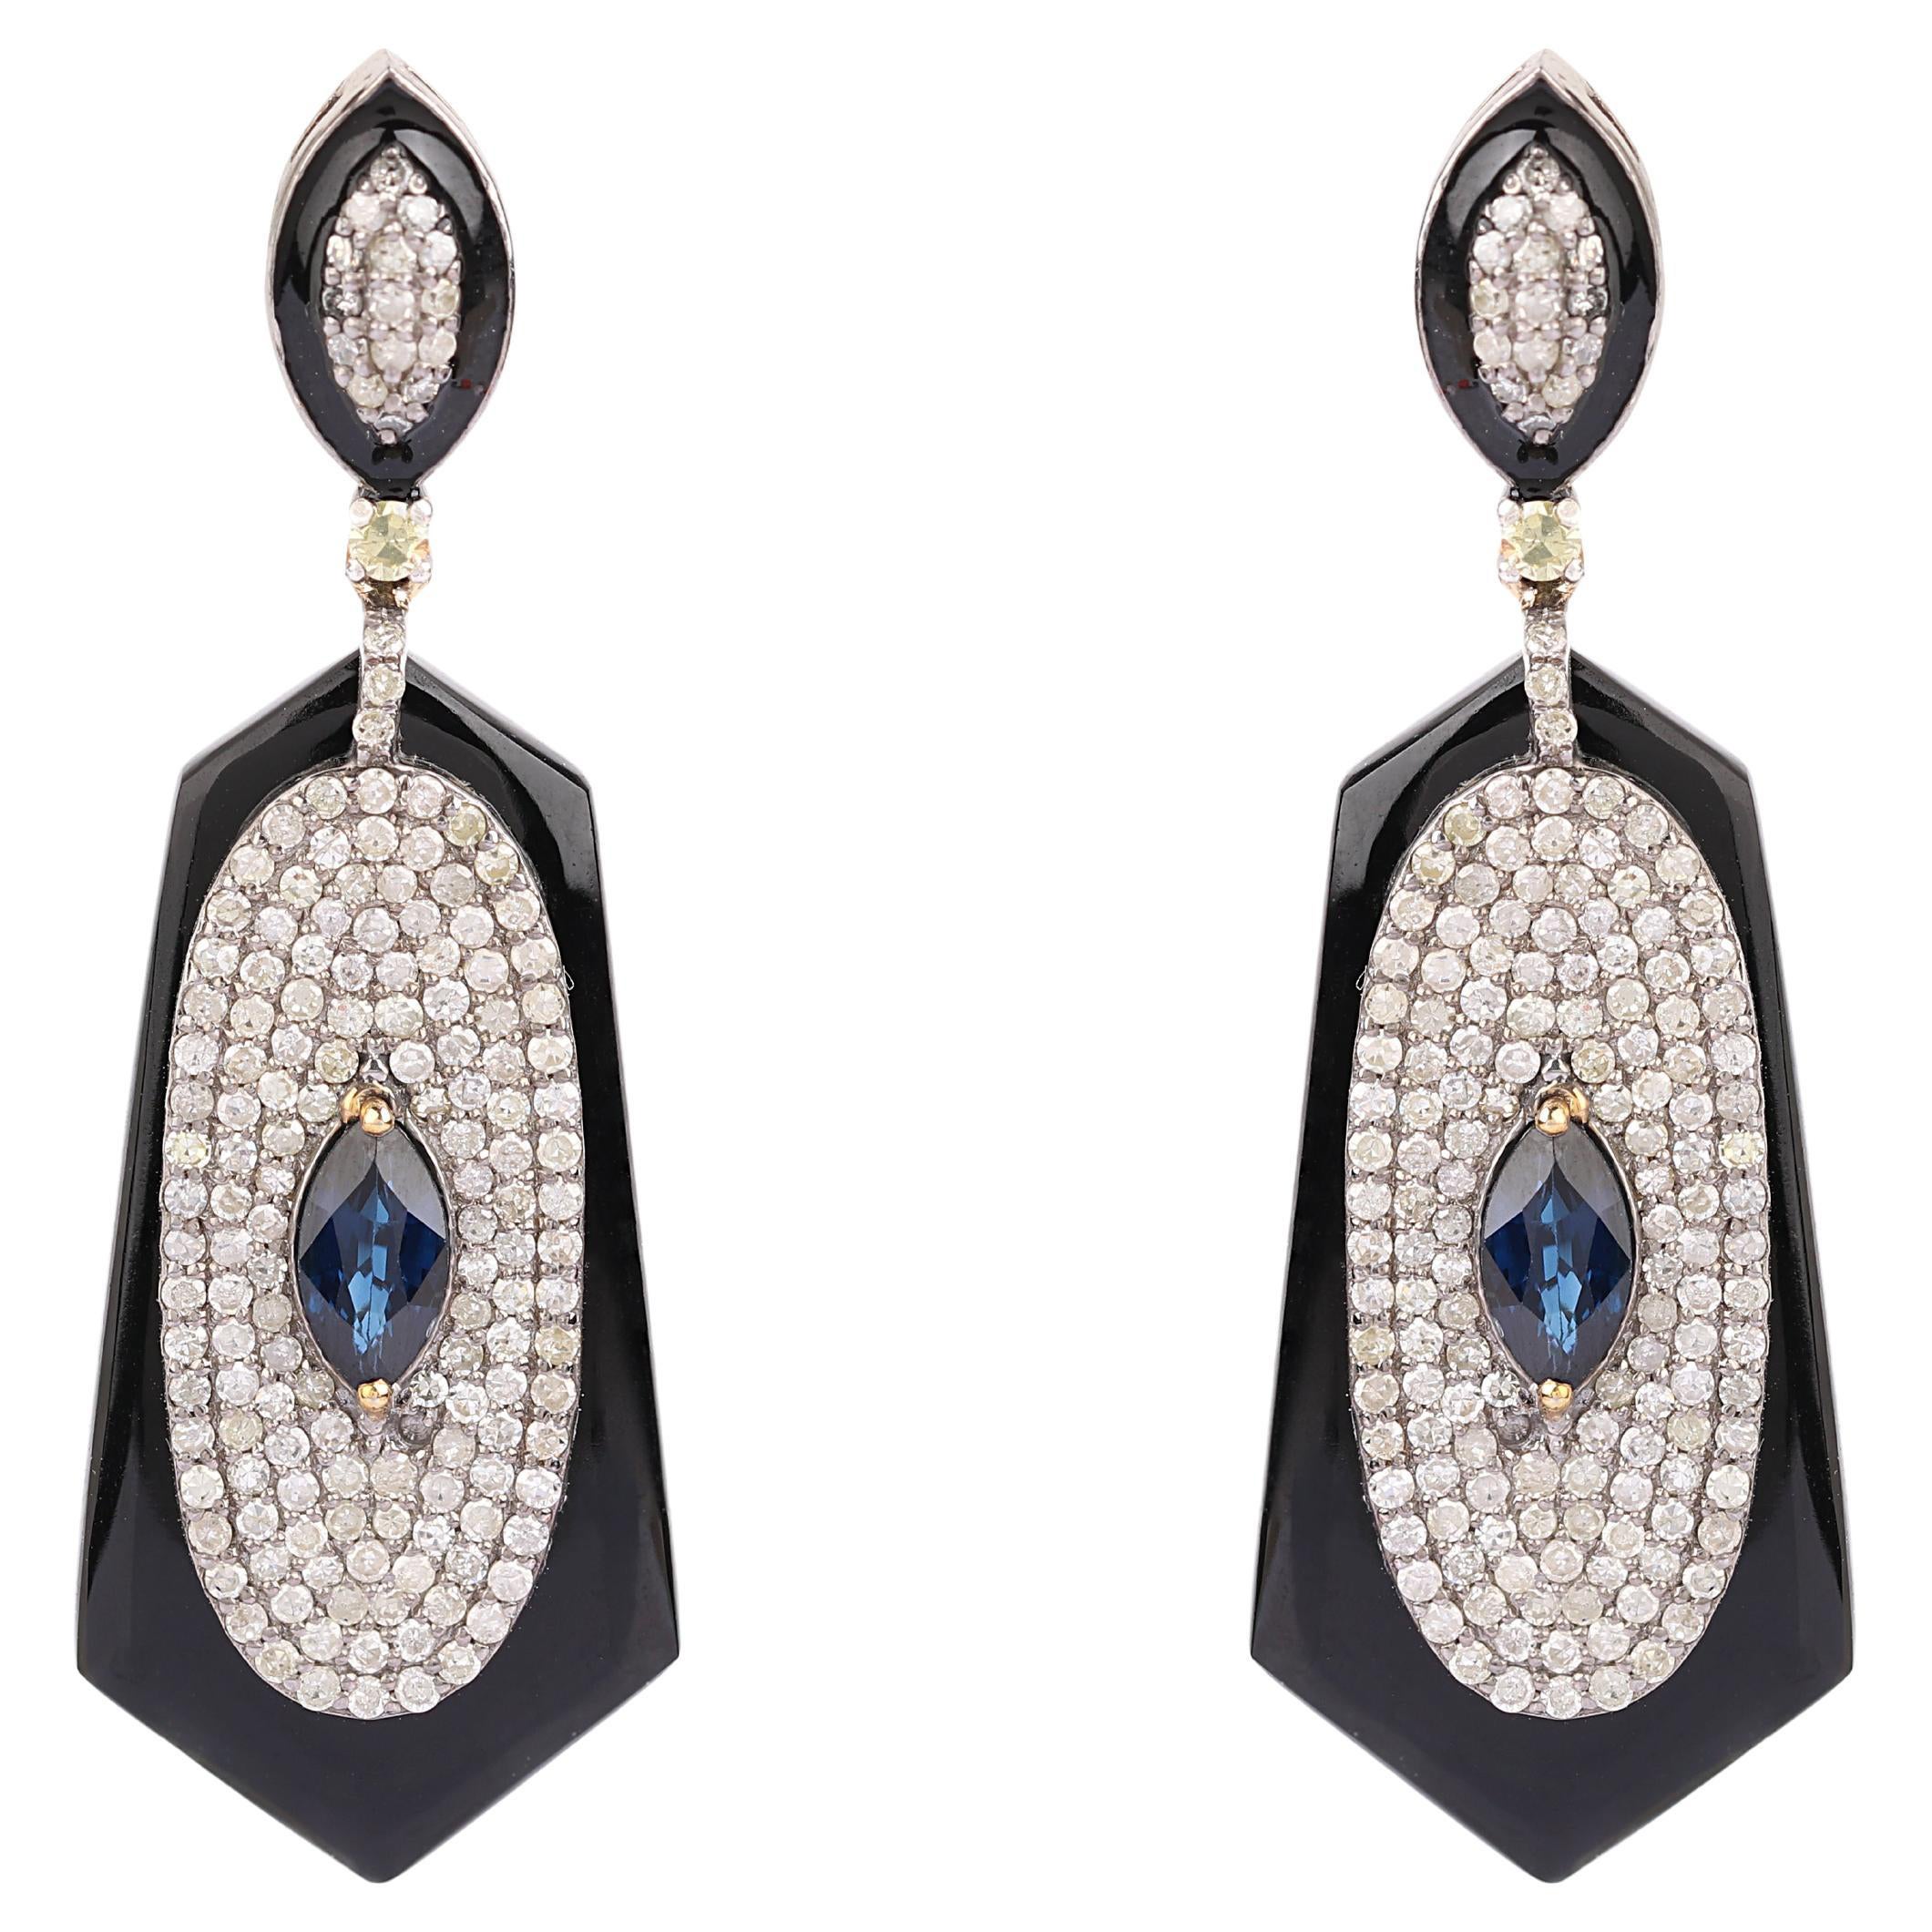 14.24 Carats Diamond, Sapphire, and Onyx Drop Earrings in Contemporary Style